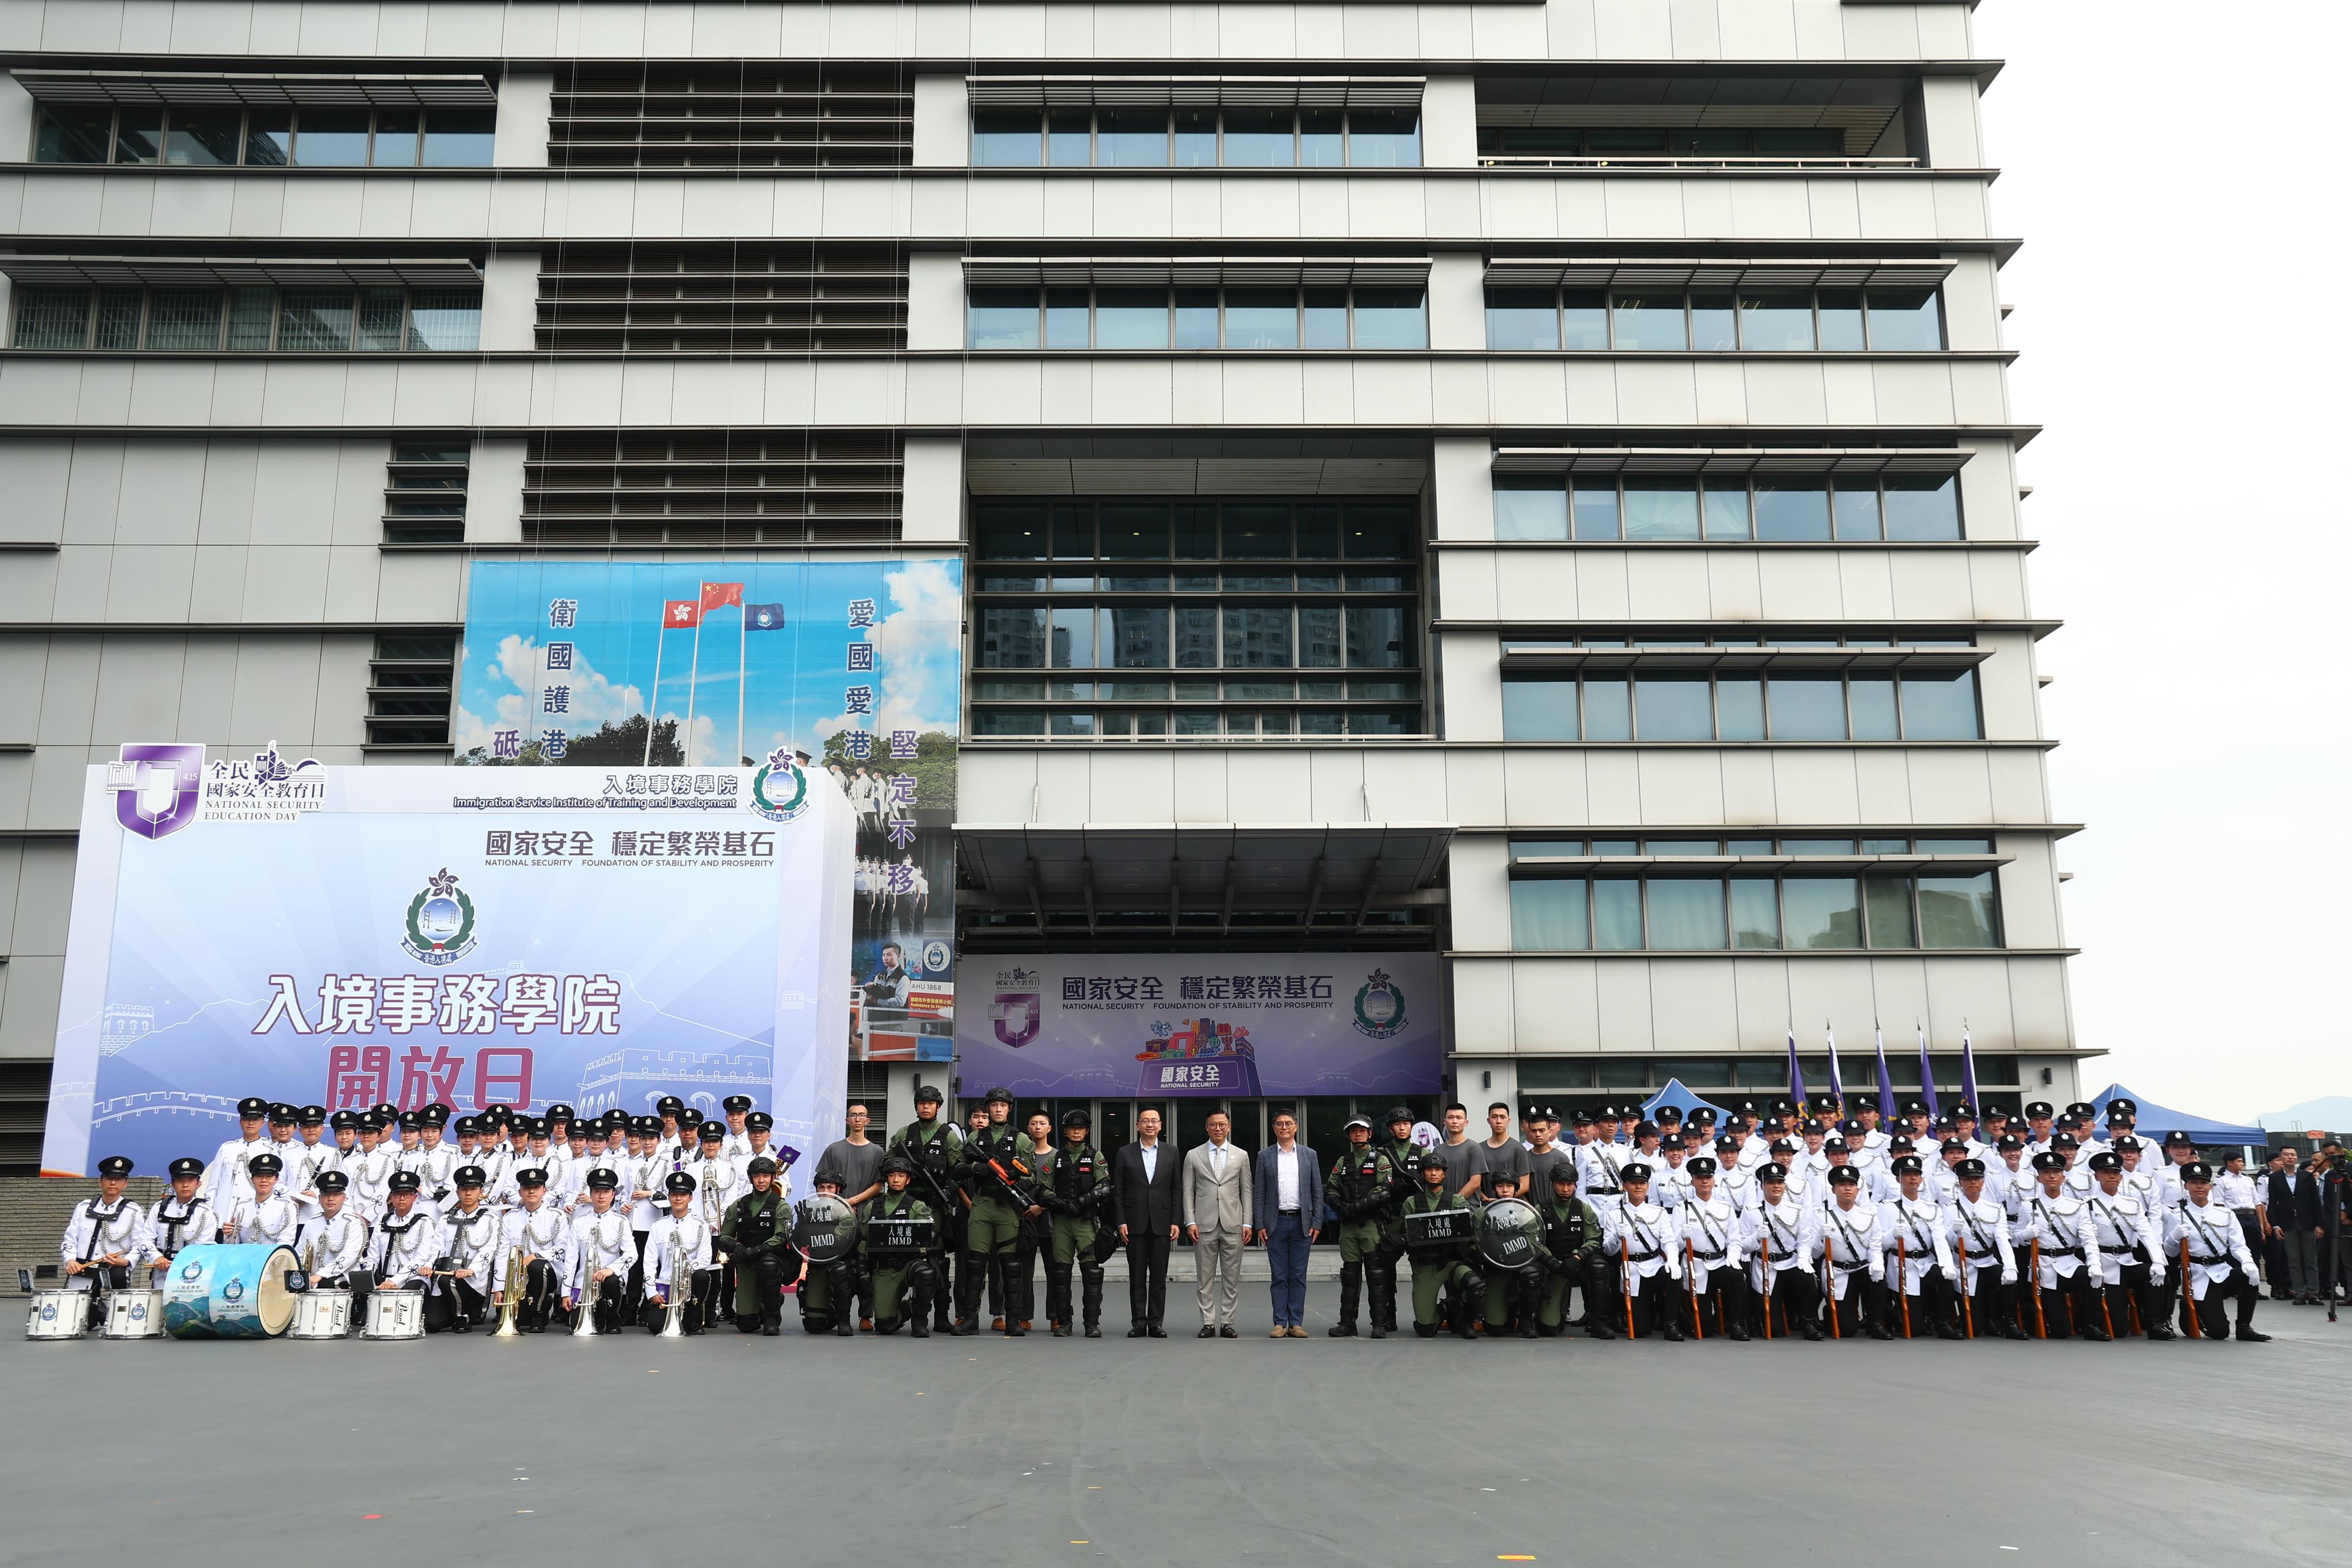 To support the National Security Education Day, the Immigration Service Institute of Training and Development held an open day today (April 15). Photo shows the Deputy Secretary for Justice, Mr Cheung Kwok-kwan (front row, centre), accompanied by directorate officers of the Immigration Department, having a group photo with members of the Immigration Service participating in the event.